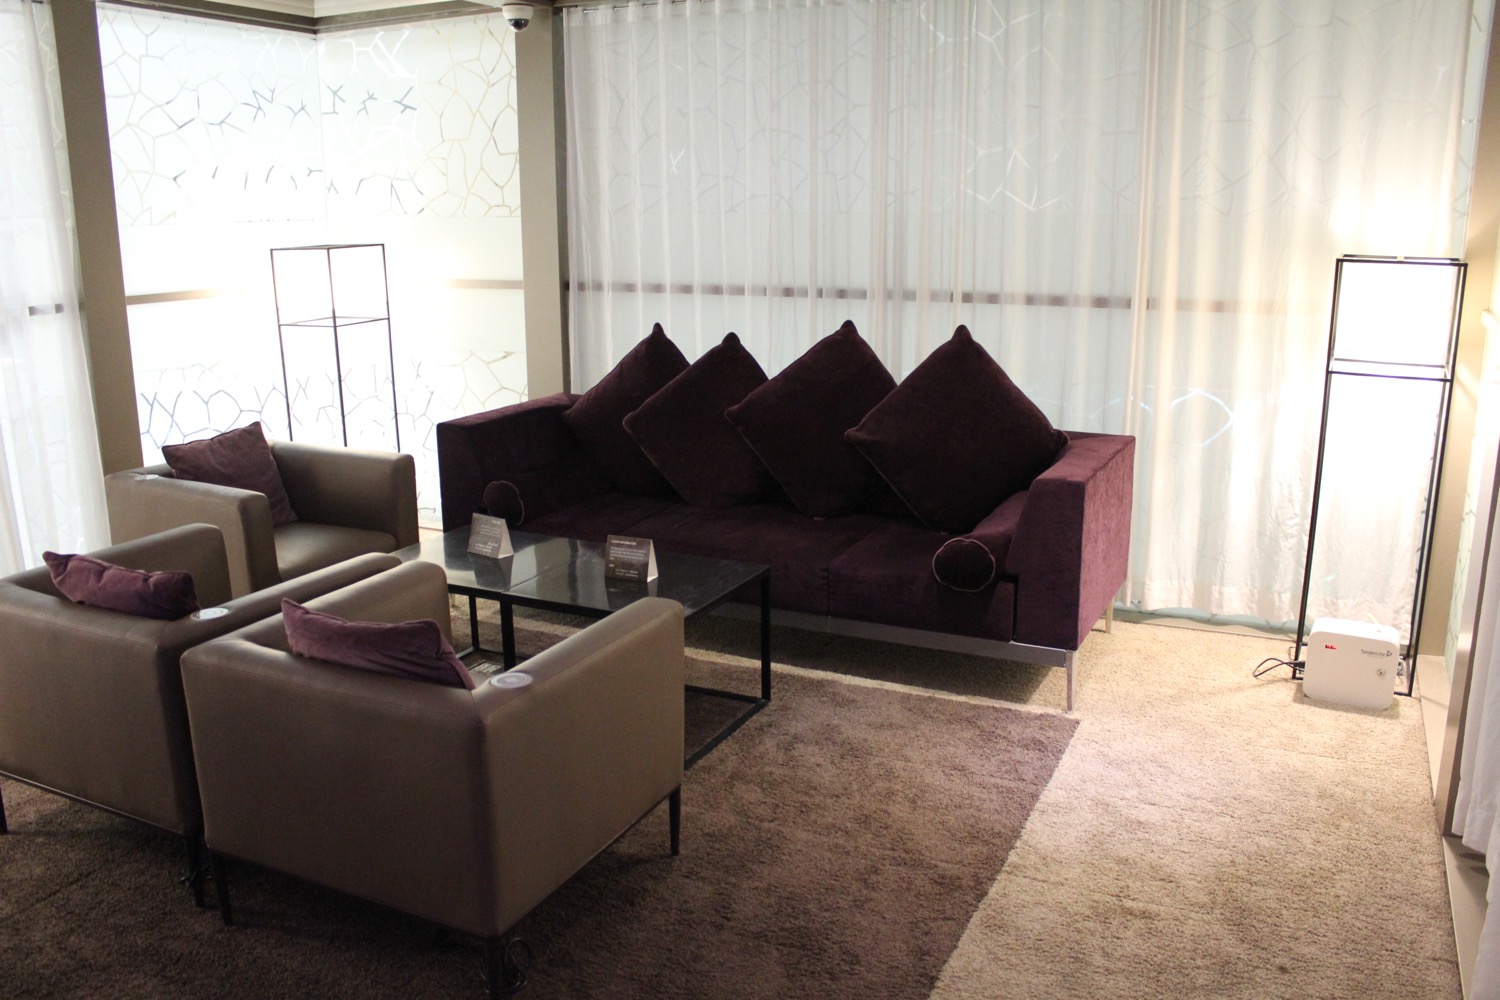 a room with purple couches and chairs